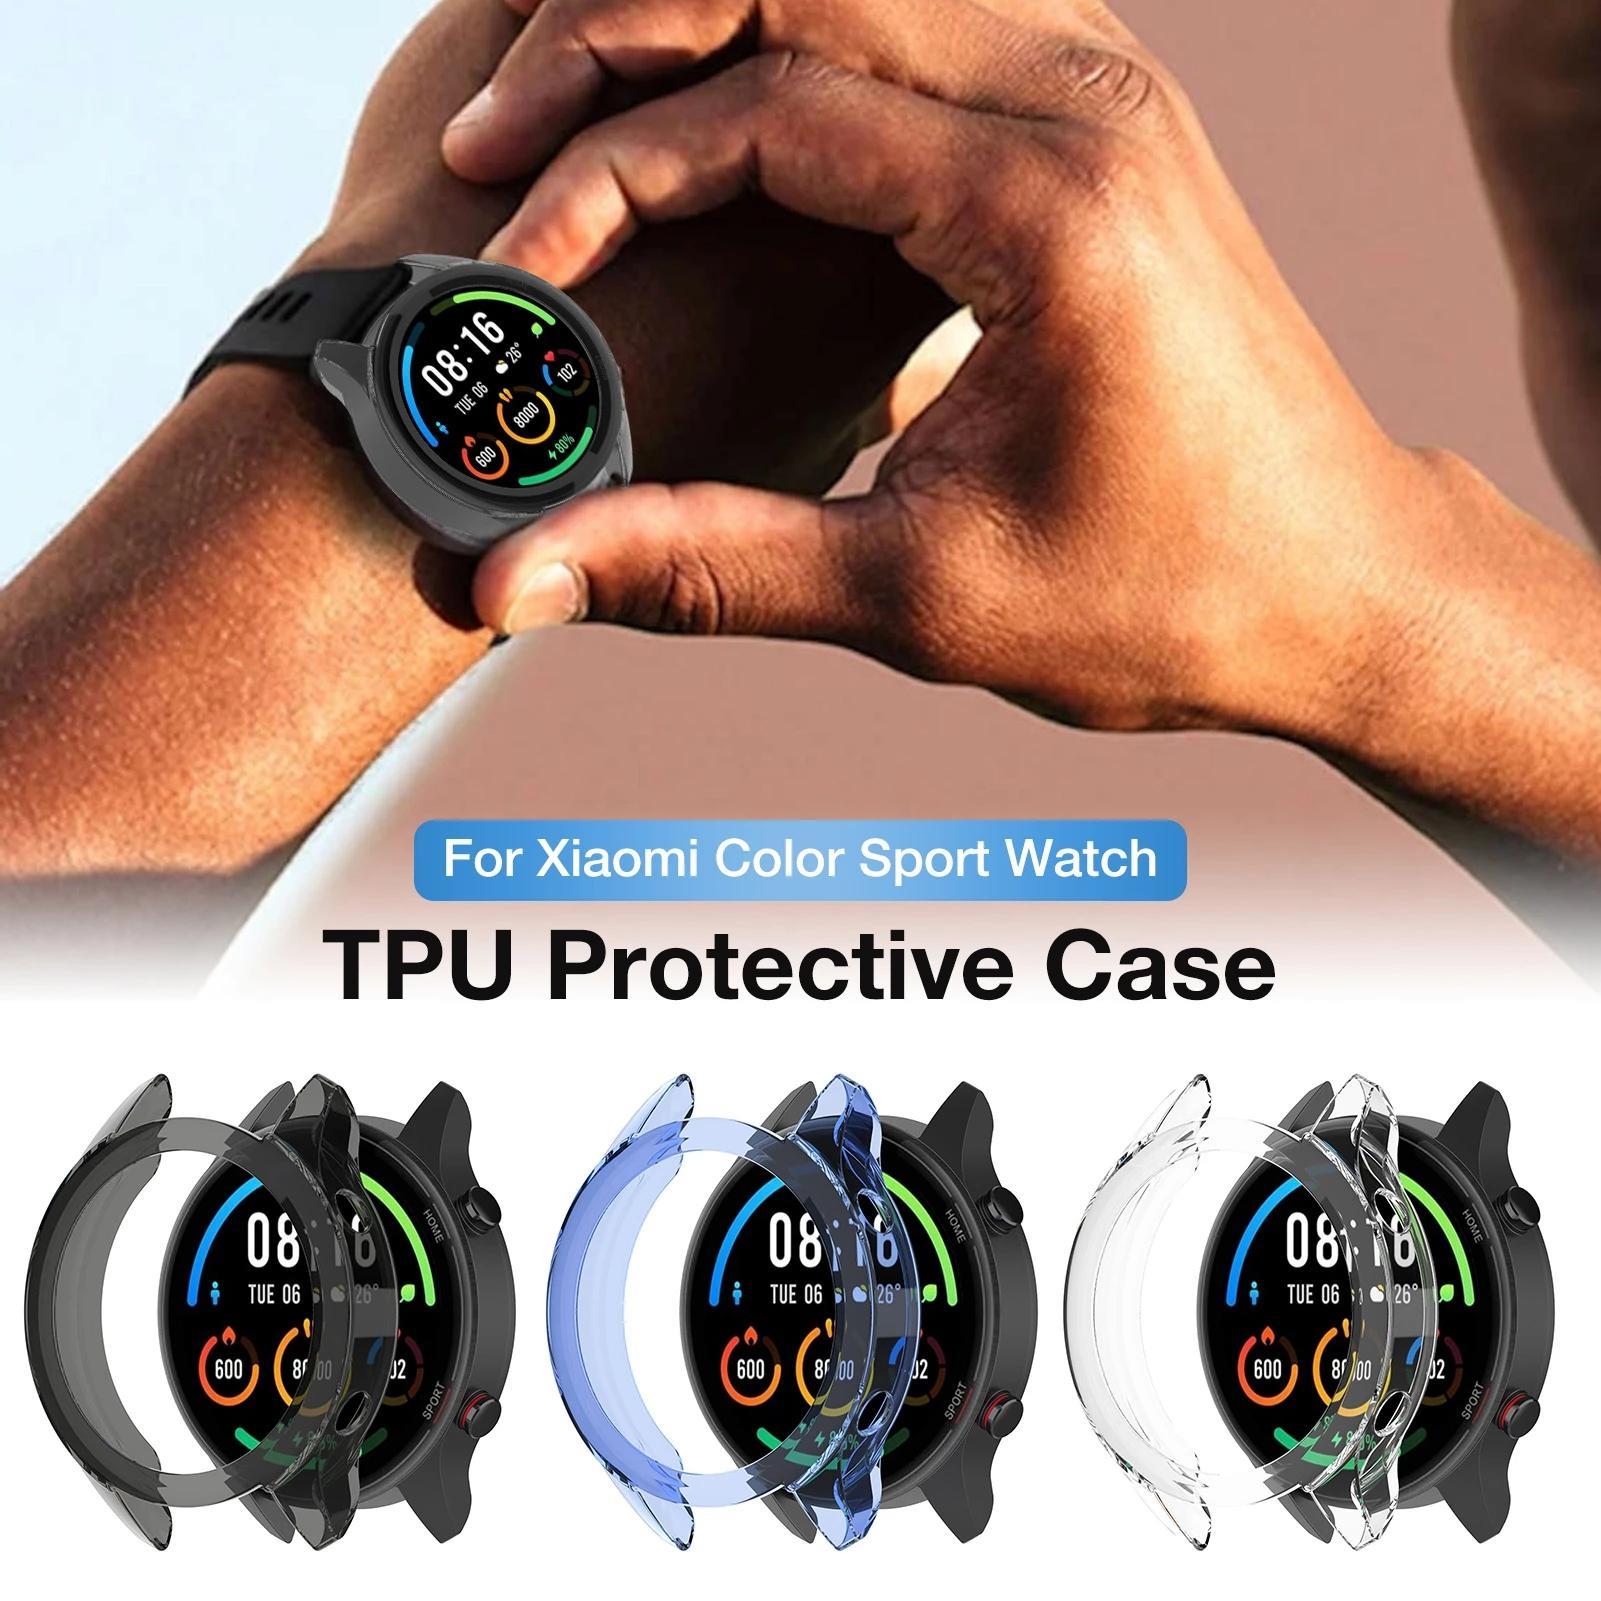 TPU Transparent Case Protective Skin Cover Protector Shell Frame For Xiaomi Color Sport Smart Watch